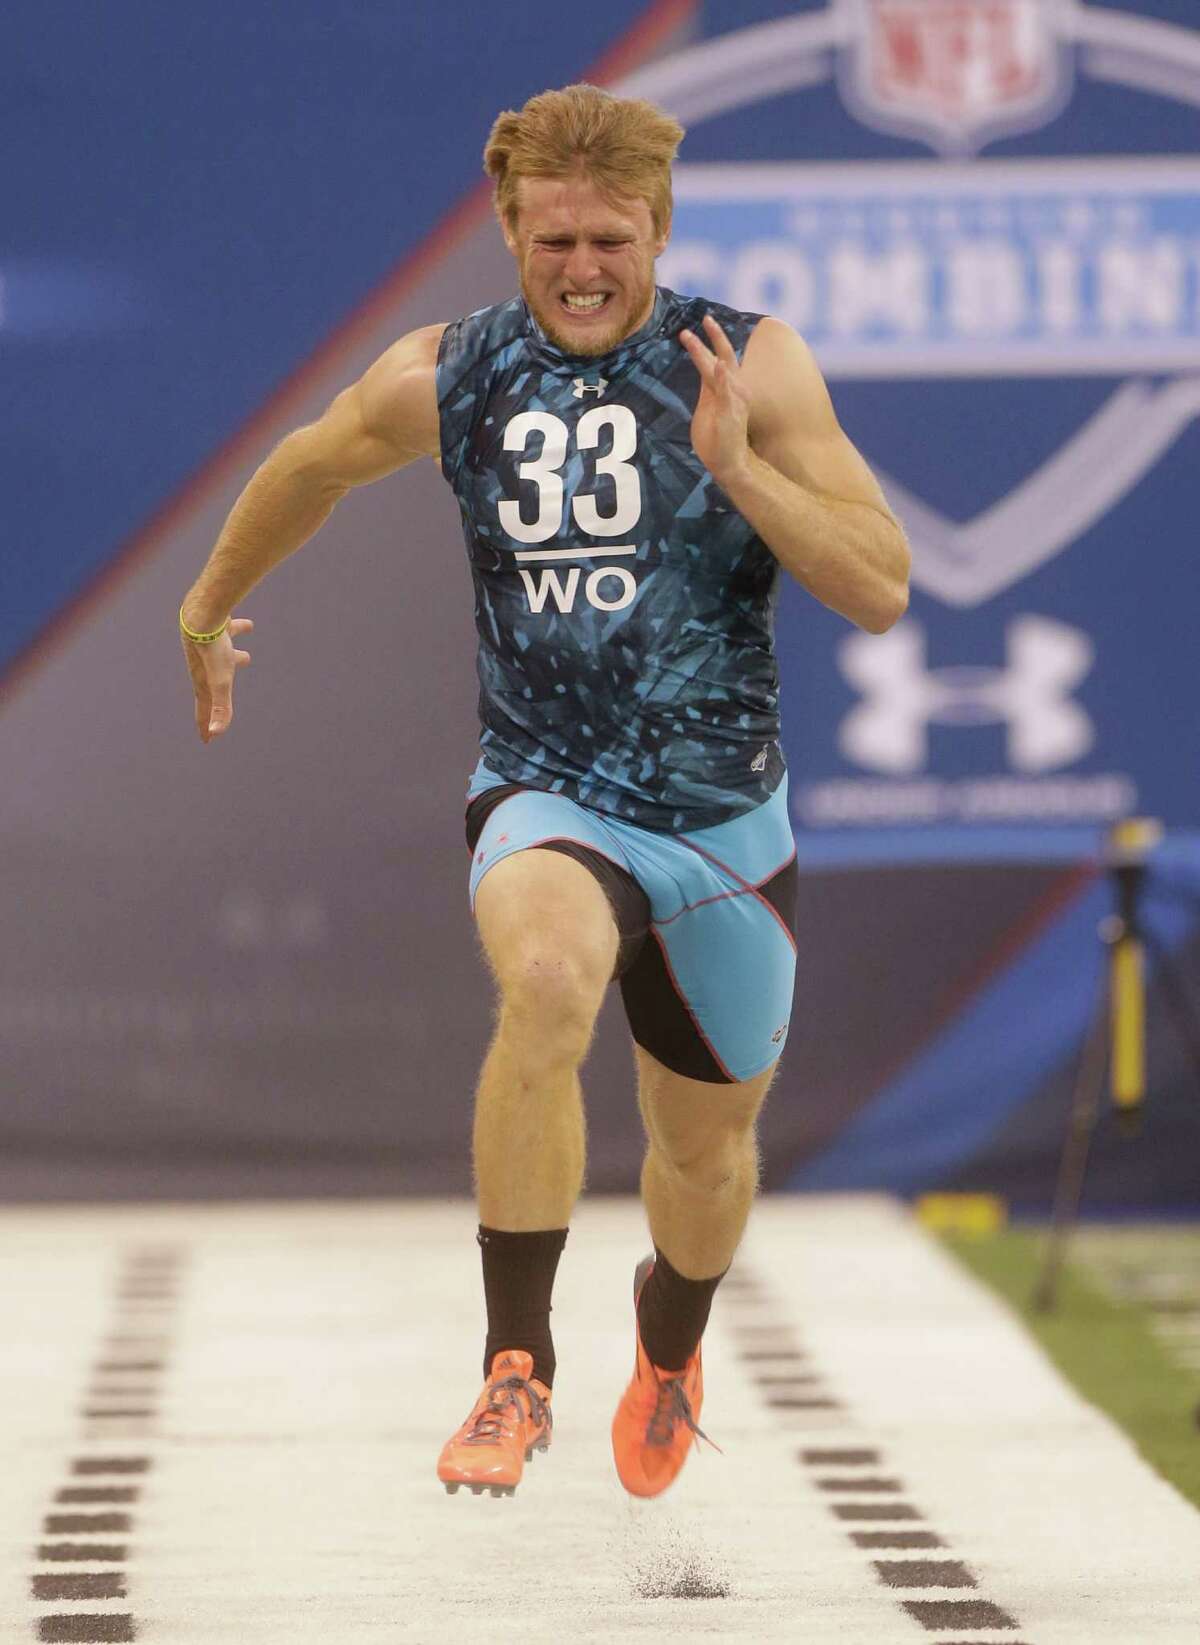 Texas A&M receiver Ryan Swope runs a drill during the NFL football scouting combine in Indianapolis, Sunday, Feb. 24, 2013. (AP Photo/Dave Martin)